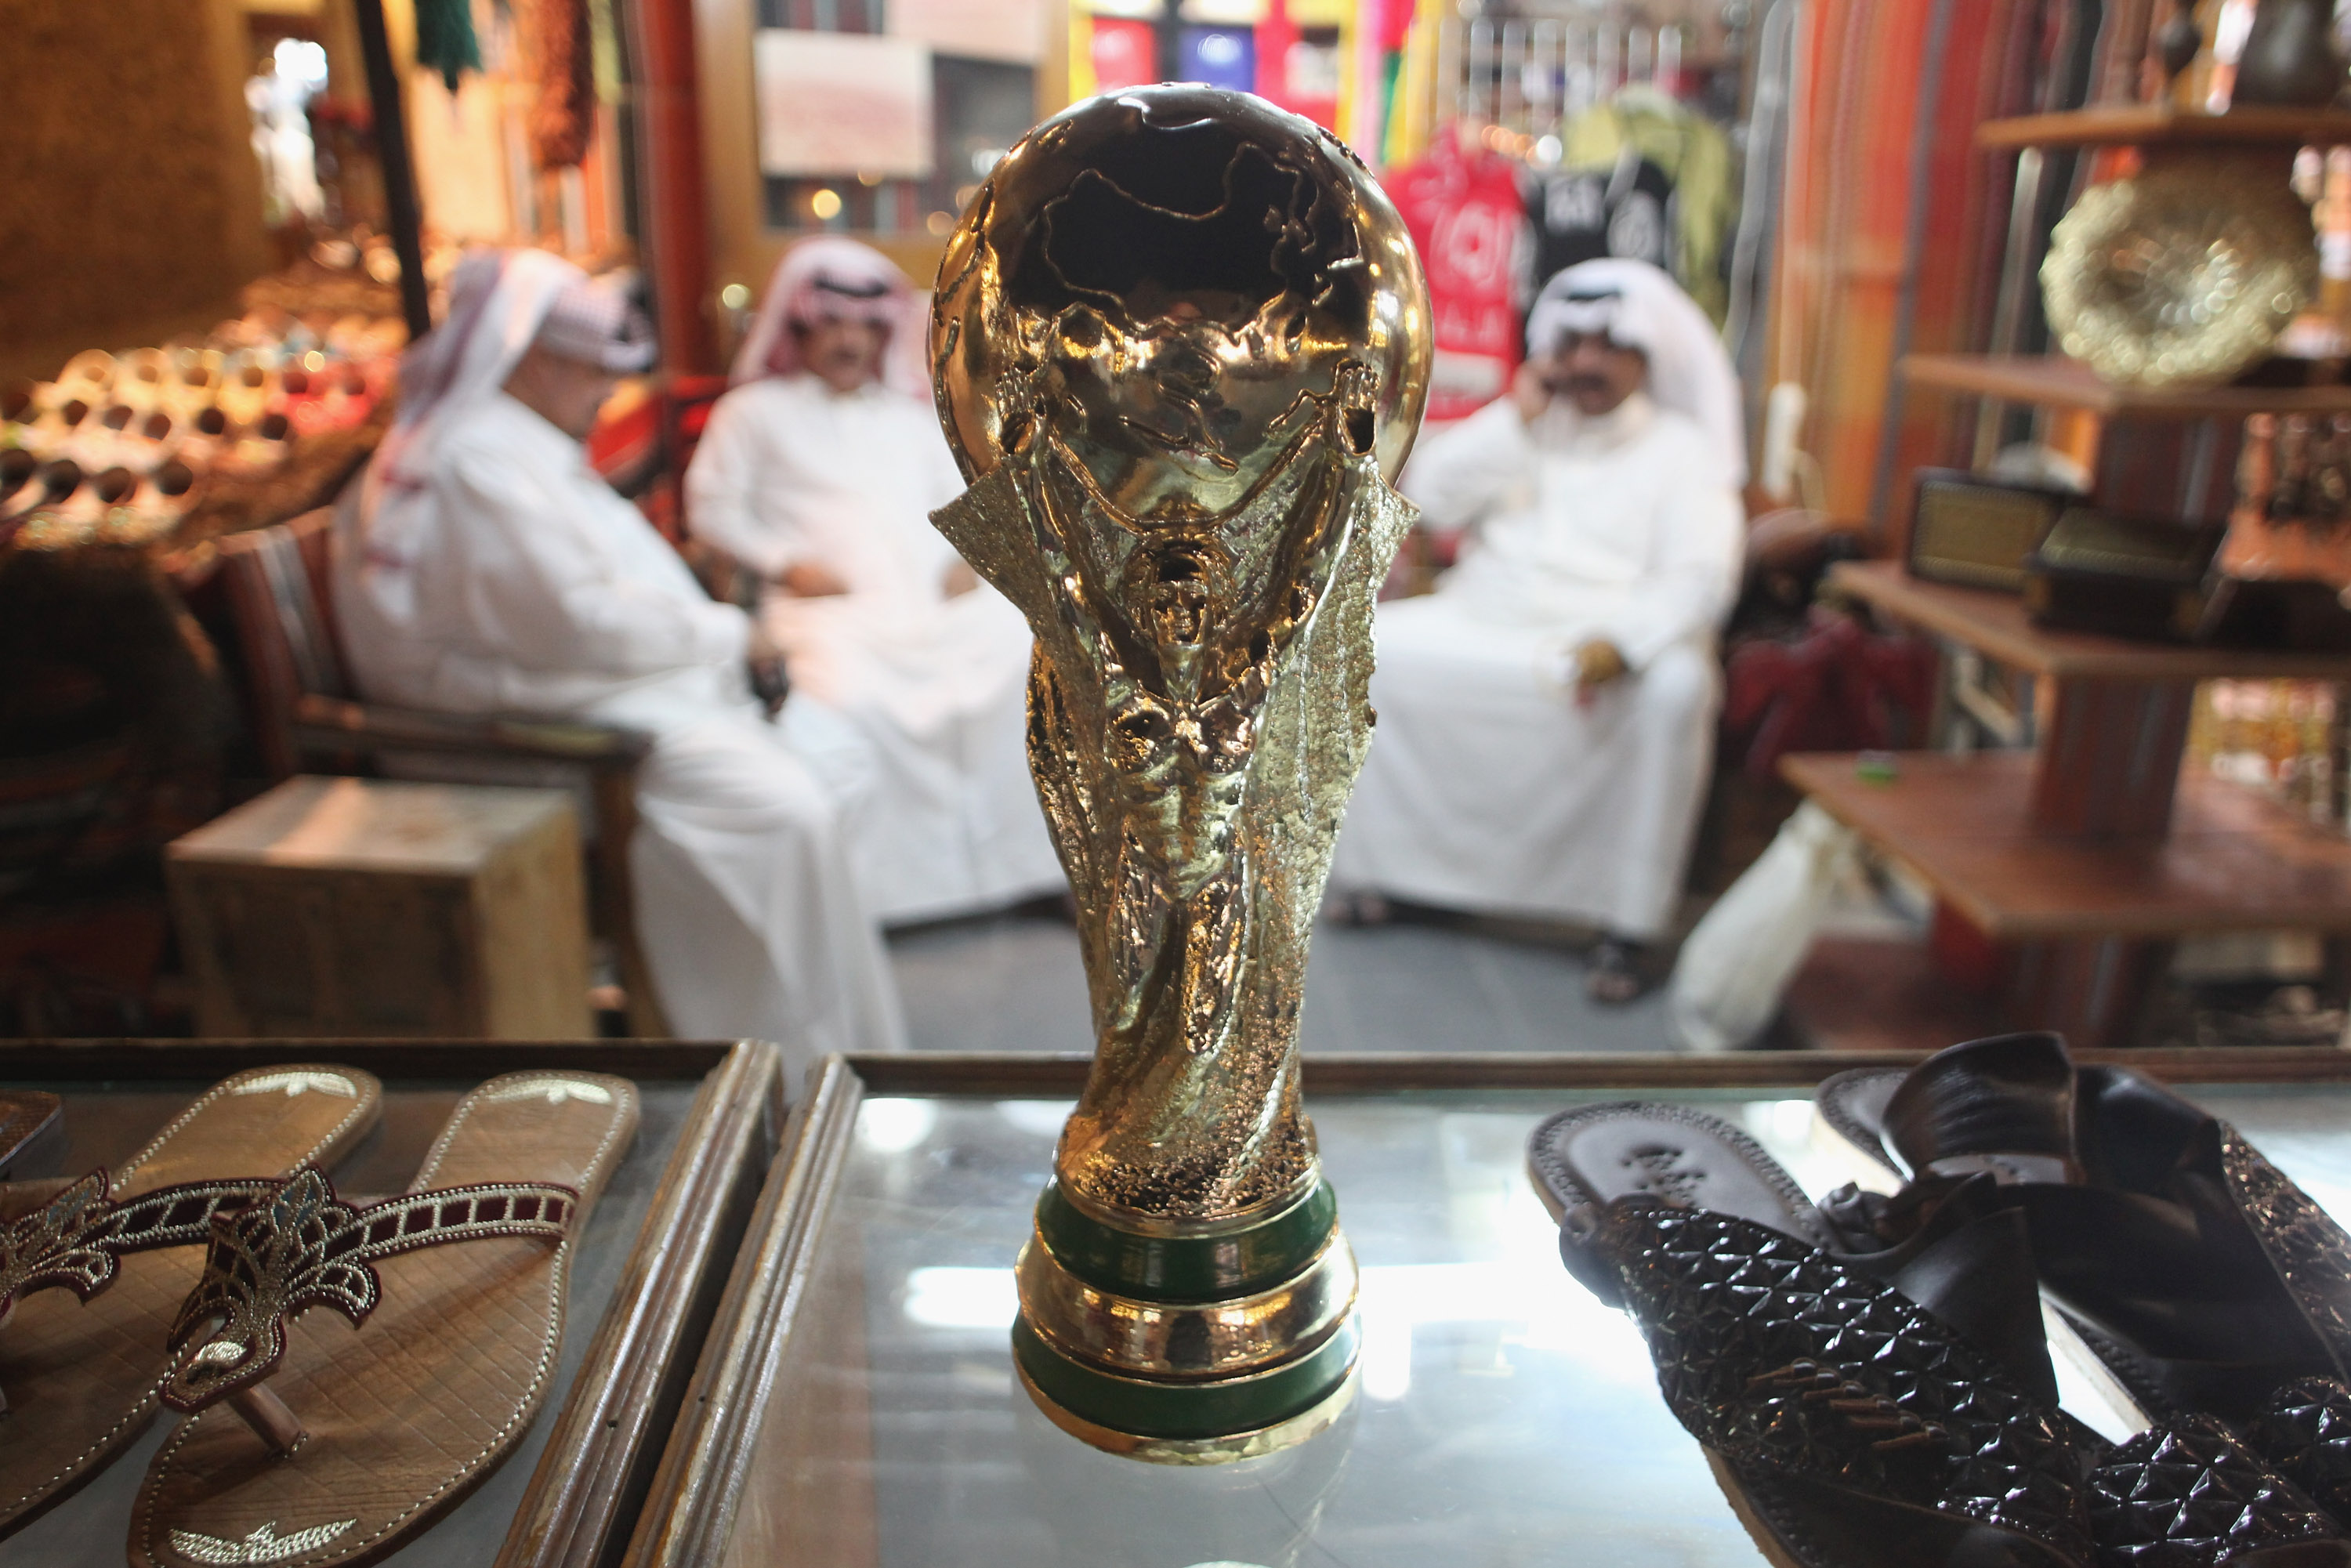 DOHA, QATAR - OCTOBER 24:  Arab men sit at a shoemaker's stall with a replica of the FIFA World Cup trophy in the Souq Waqif traditional market on October 24, 2011 in Doha, Qatar. Qatar will host the 2022 FIFA World Cup football competition and is slated to tackle a variety of infrastructure projects, including the construction of new stadiums.  (Photo by Sean Gallup/Getty Images) (Sean Gallup/Getty Images)